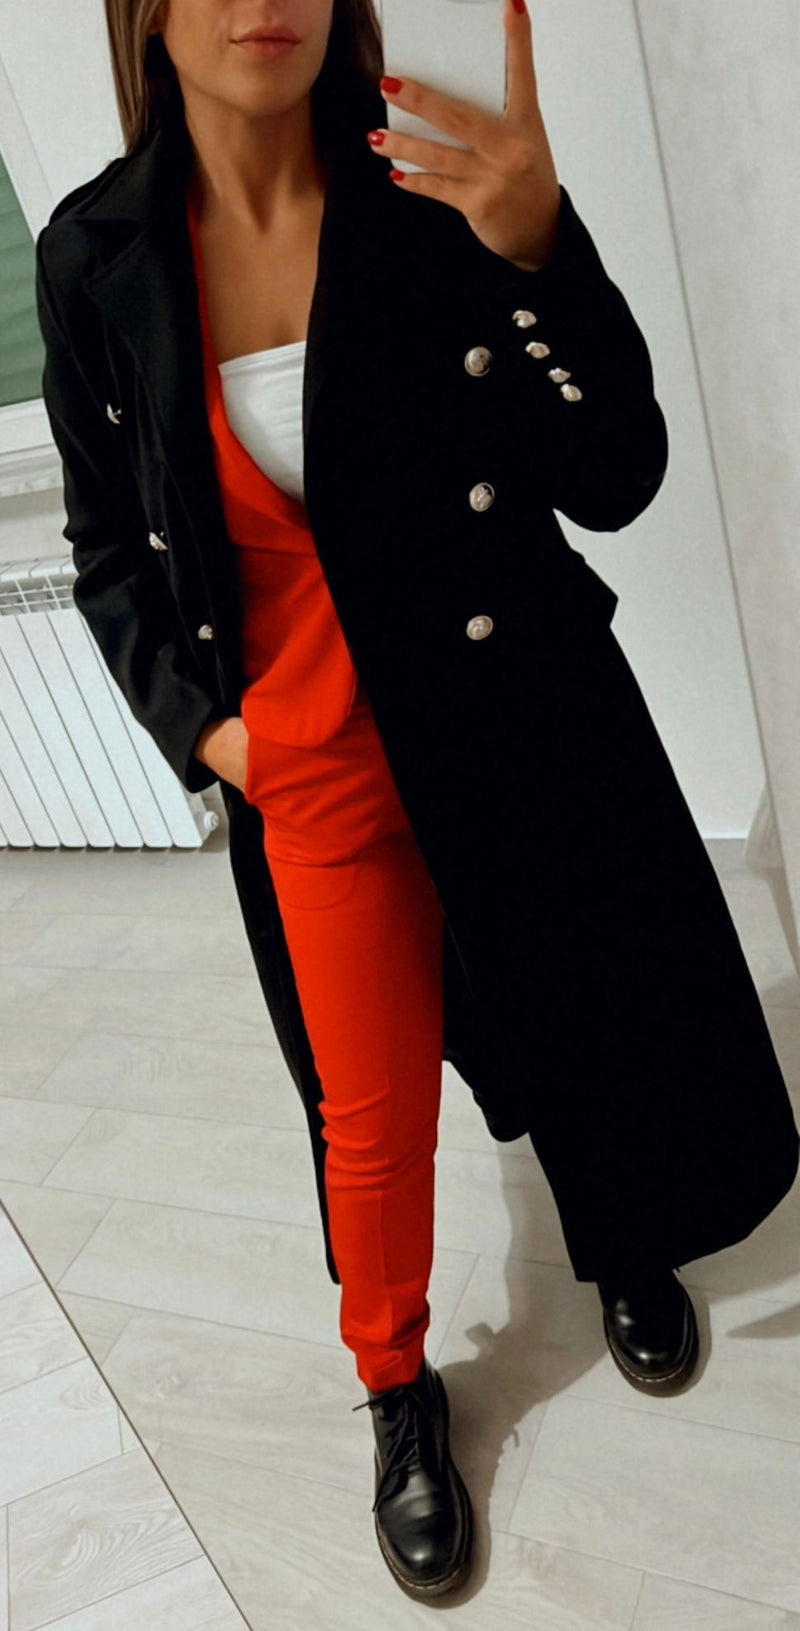 LONG COAT WITH REVERSE